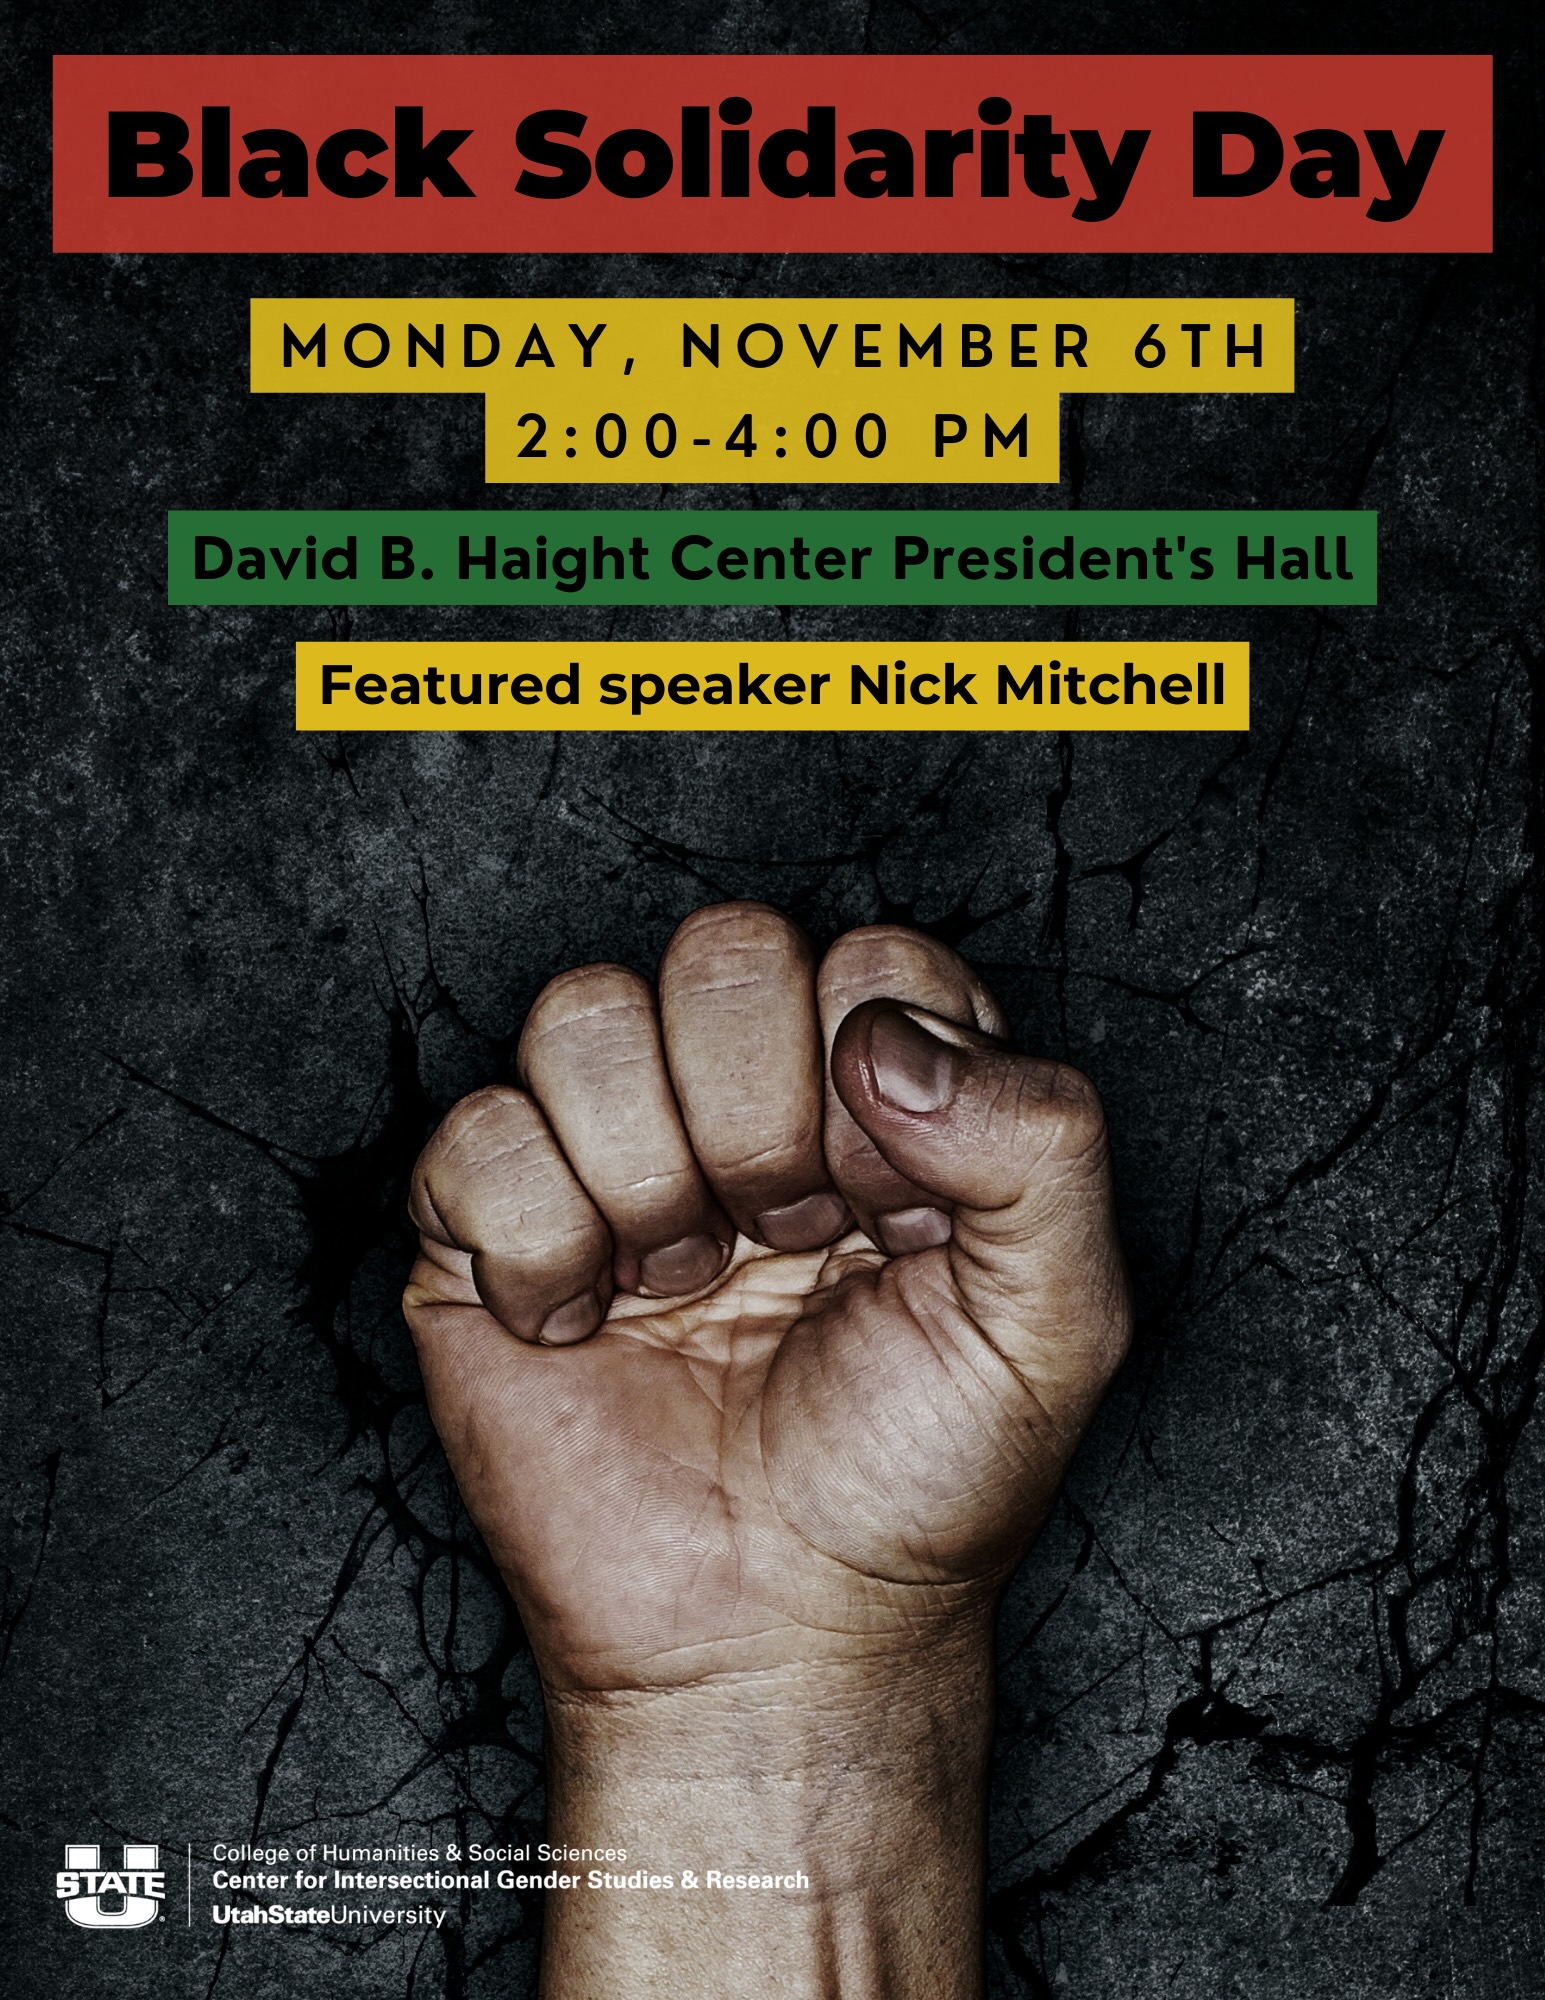 Black Solidarity Day: Monday November 6th 2-4:00pm David B. Haight Center President's Hall. Featuring speaker Nick MItchell